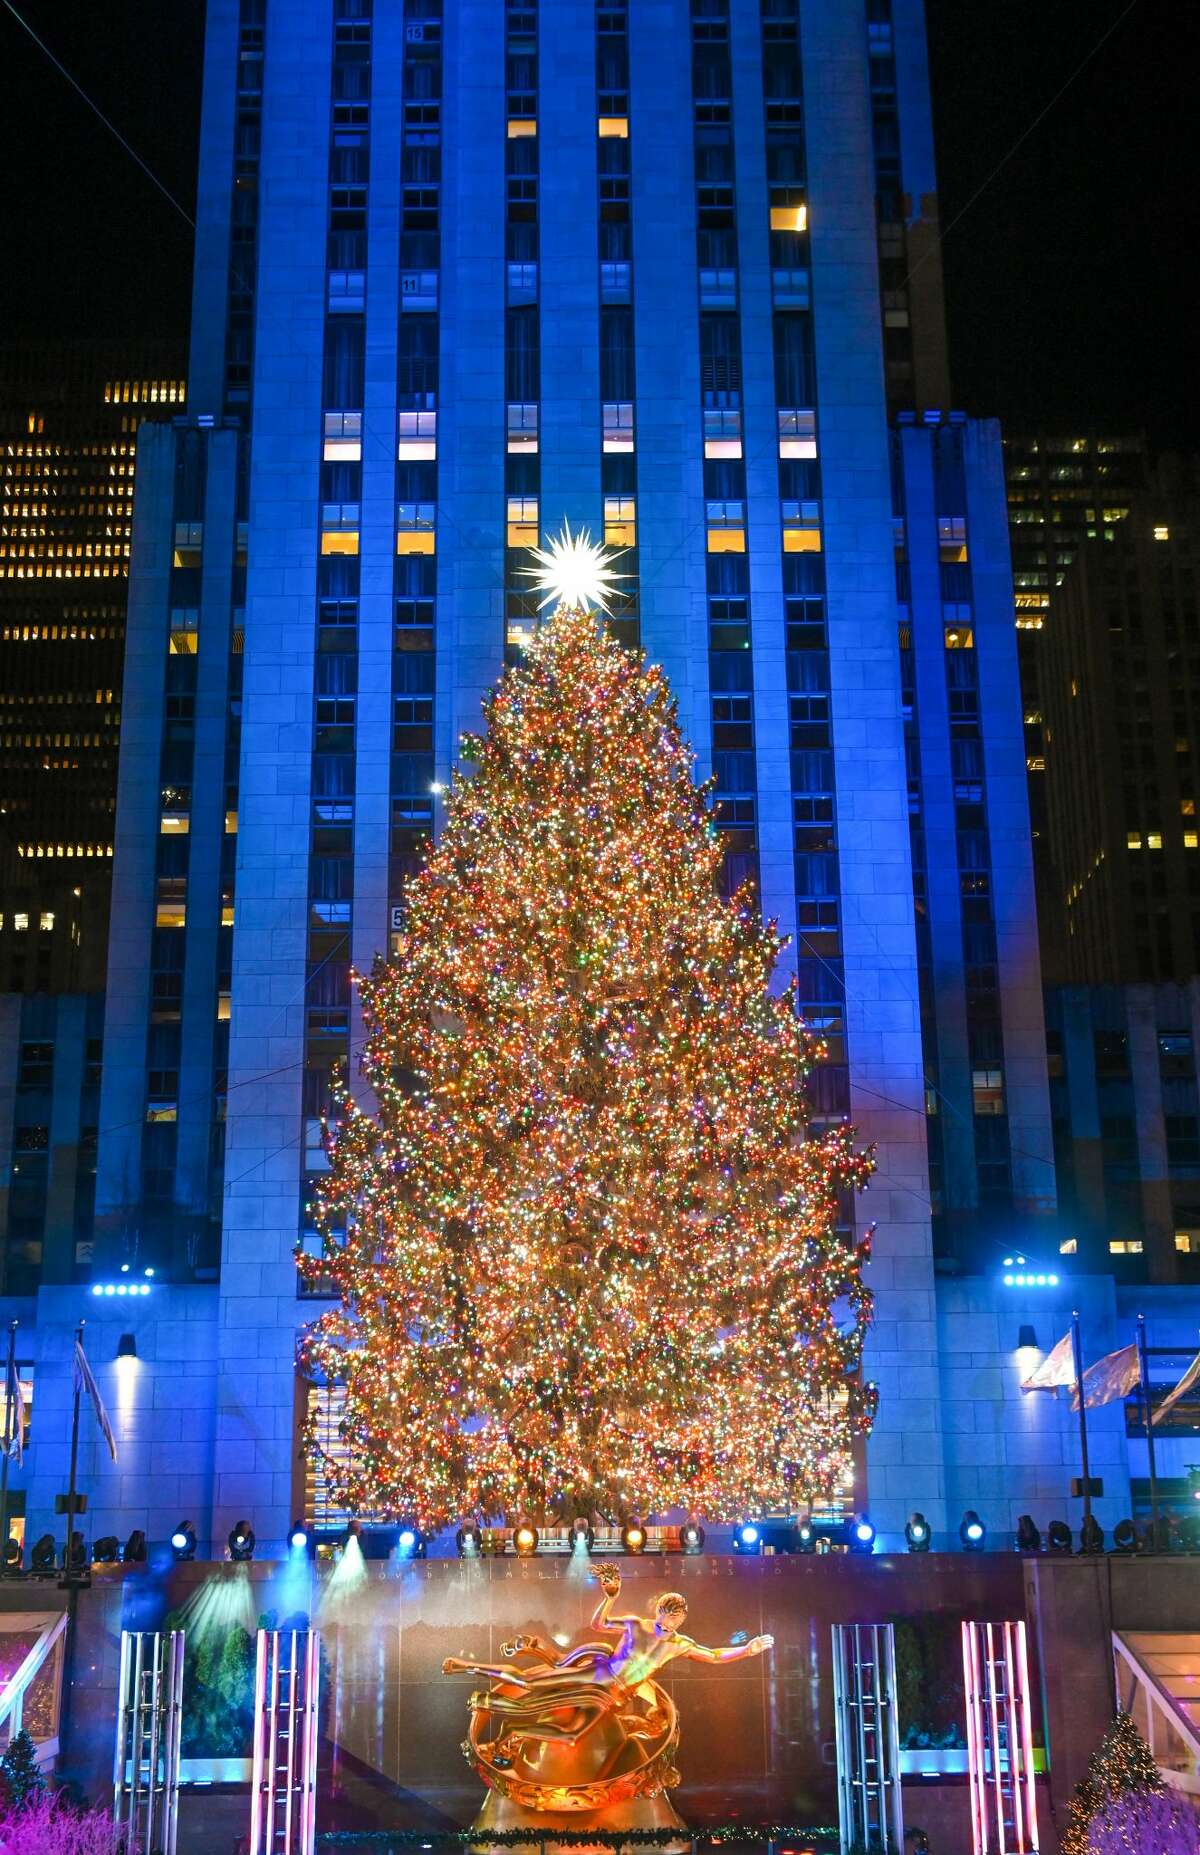 The 2020 Rockefeller Center Christmas tree came from Oneonta in New York State.